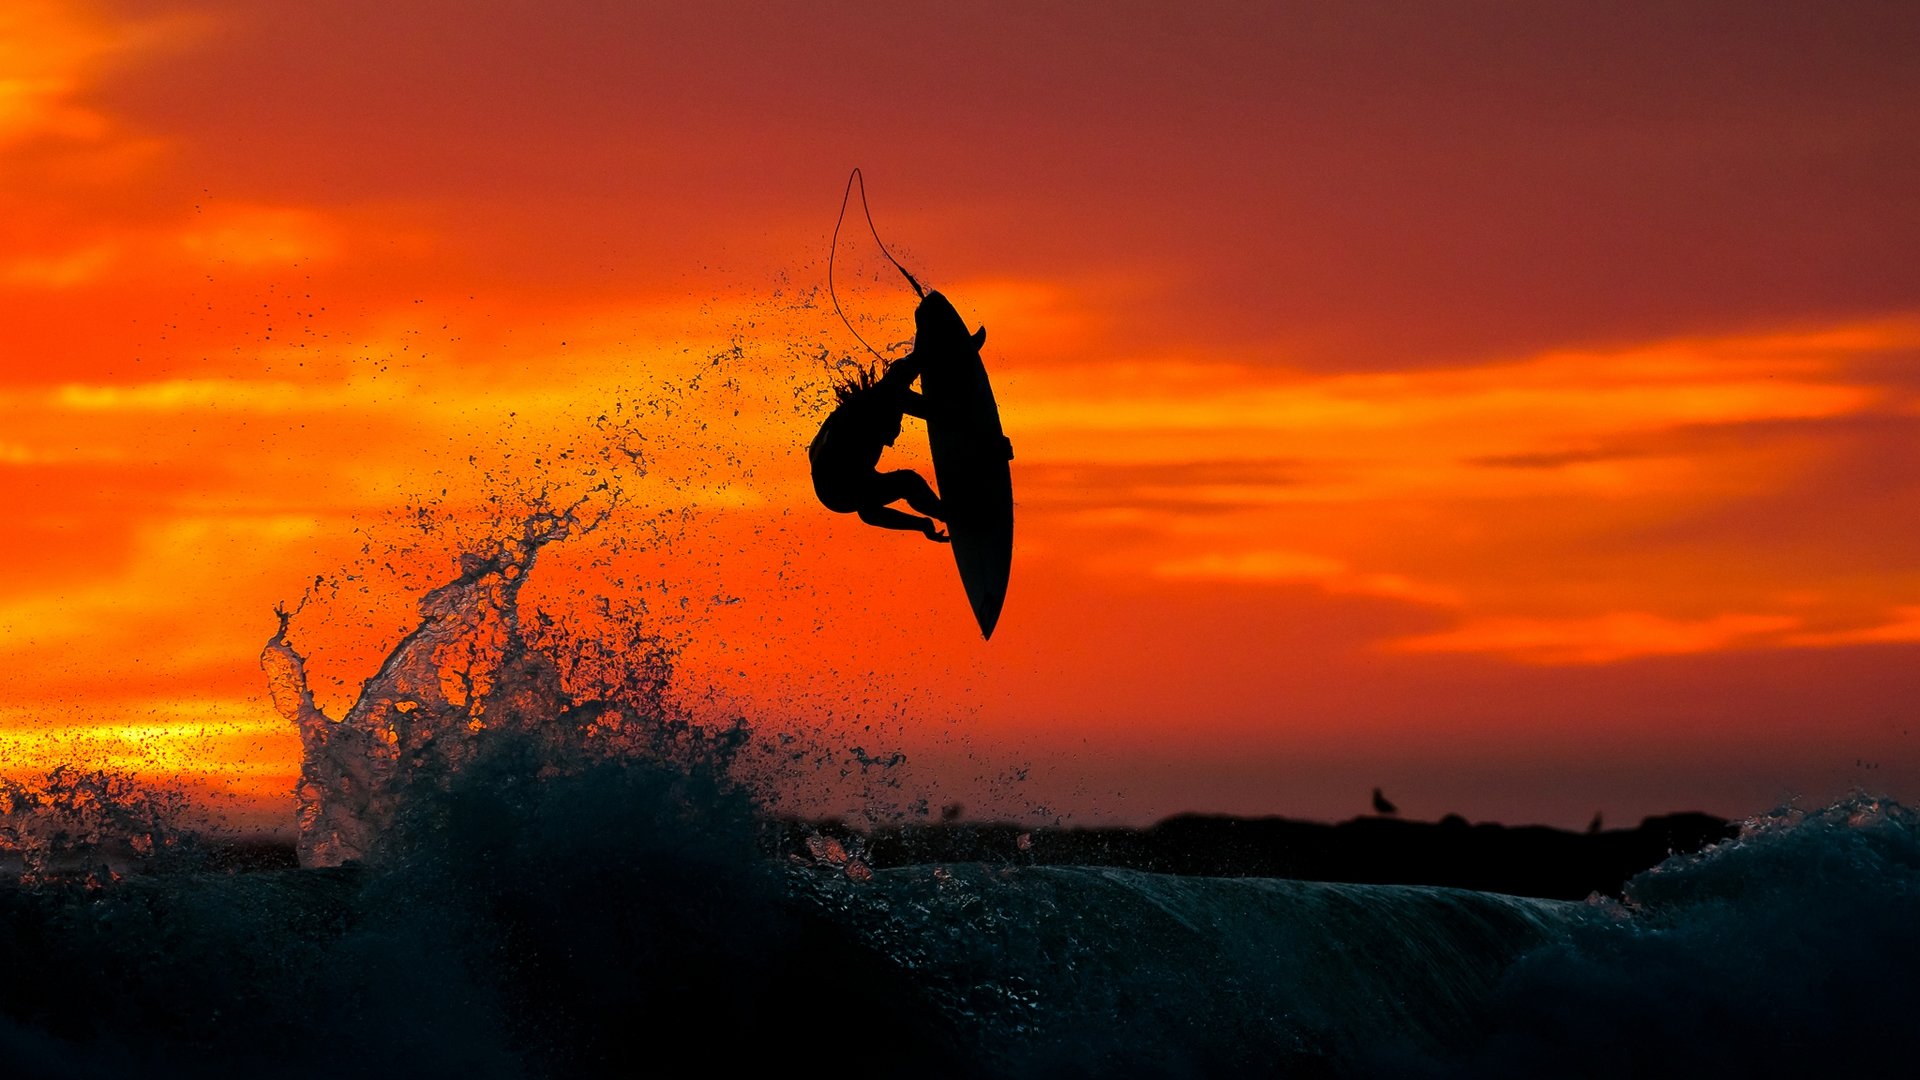 Surfing Wallpapers   Wallpaper High Definition High Quality